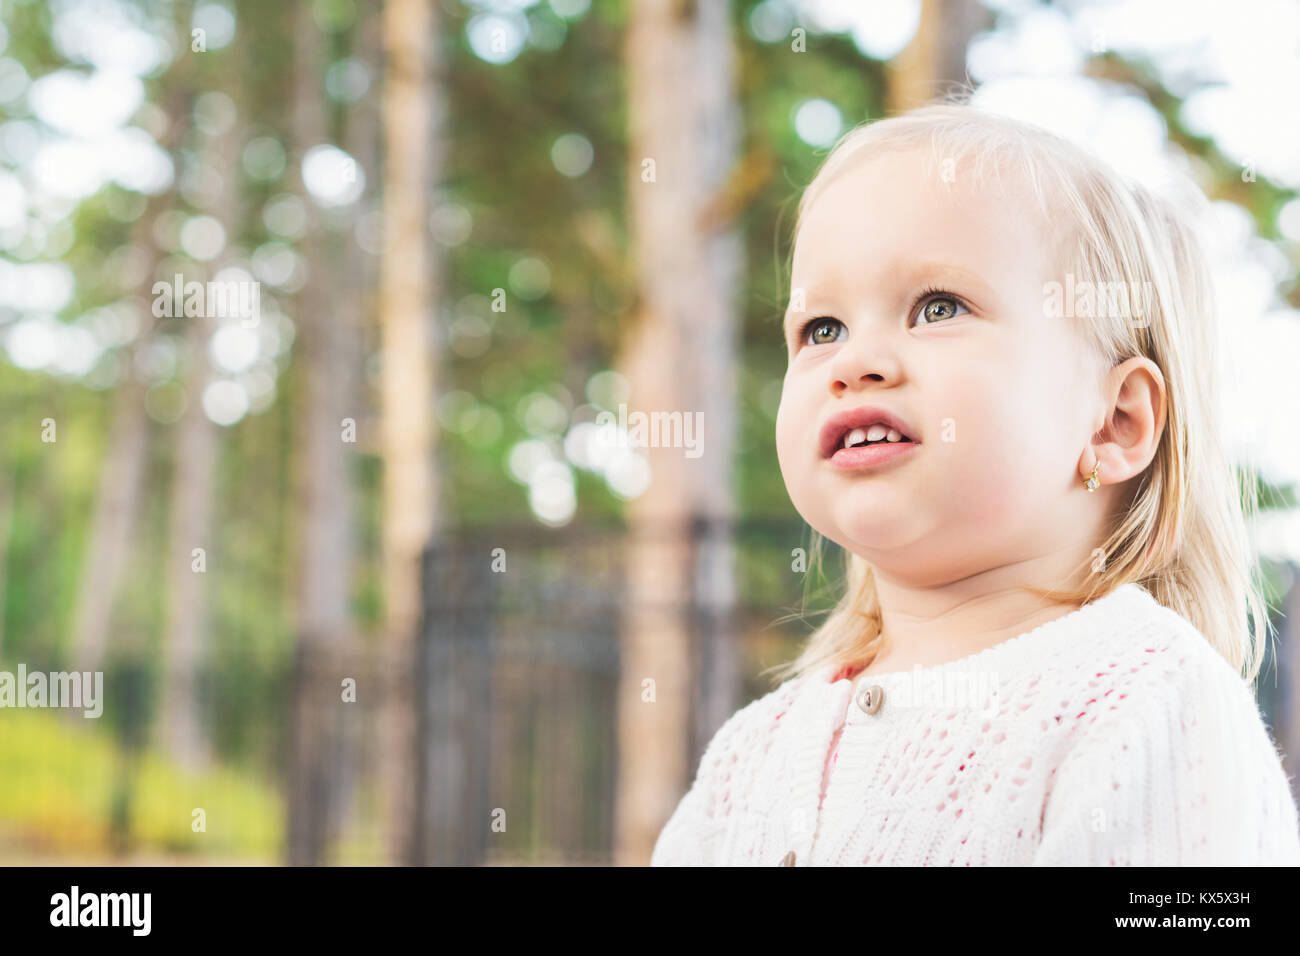 Image of sweet overweight baby girl looking away from camera. Close up portrait of a child. Cute toddler with green eyes outdoor portrait. Stock Photo